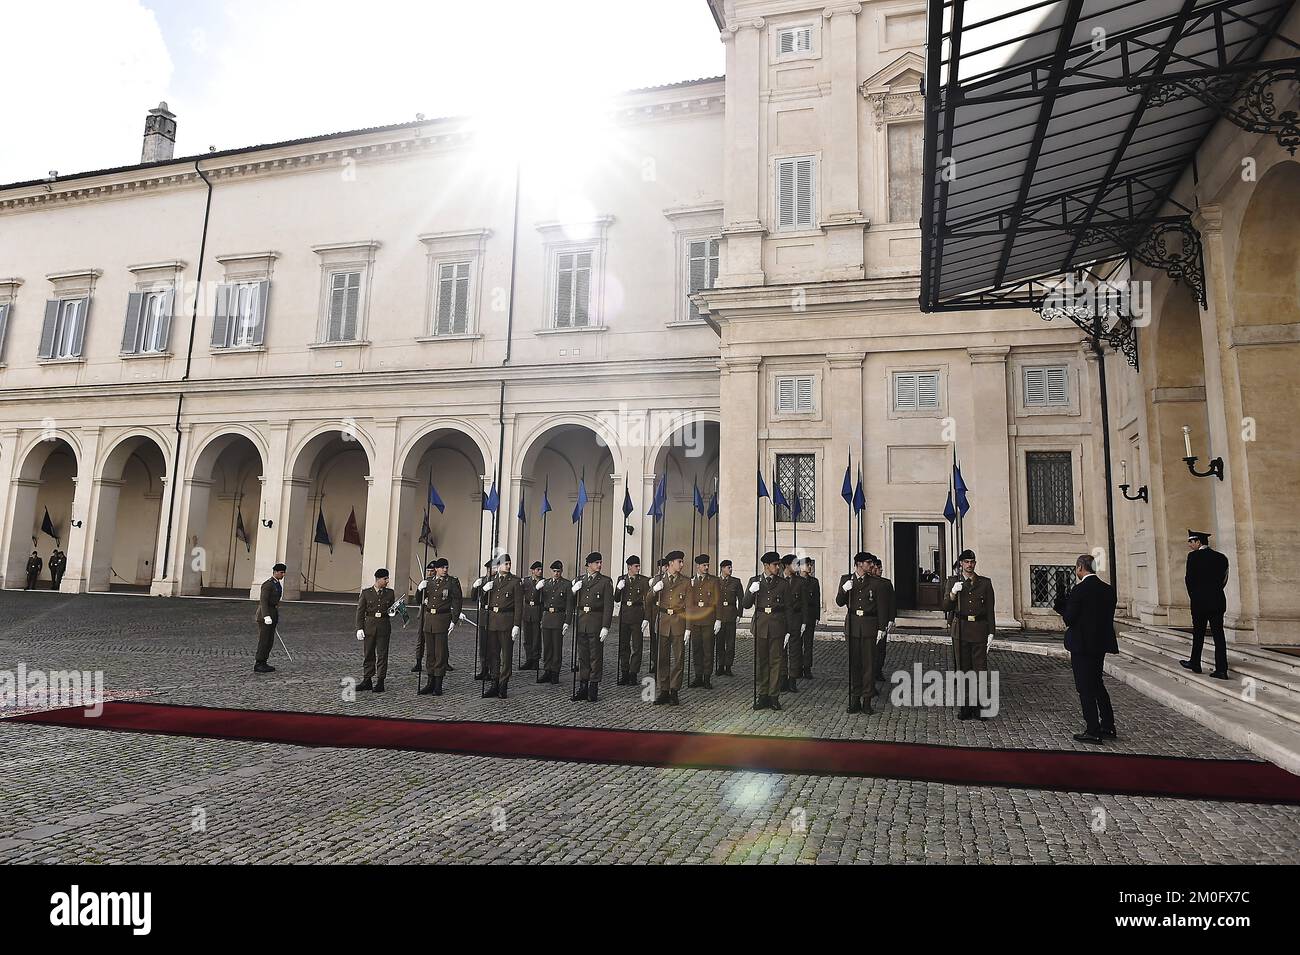 On November 6th 2018 TRH Crown Prince Frederik and Crown Princess Mary arrived in Rome with a business delegation from Denmark. One of the first points on the agenda was lunch at Palazzo del Quirinale with Italian President Sergio Mattarella and his wife Laura Mattarella. The visit lasts from November 6th to 8th and the Crown Prince Couple will attend several business and state events. Stock Photo